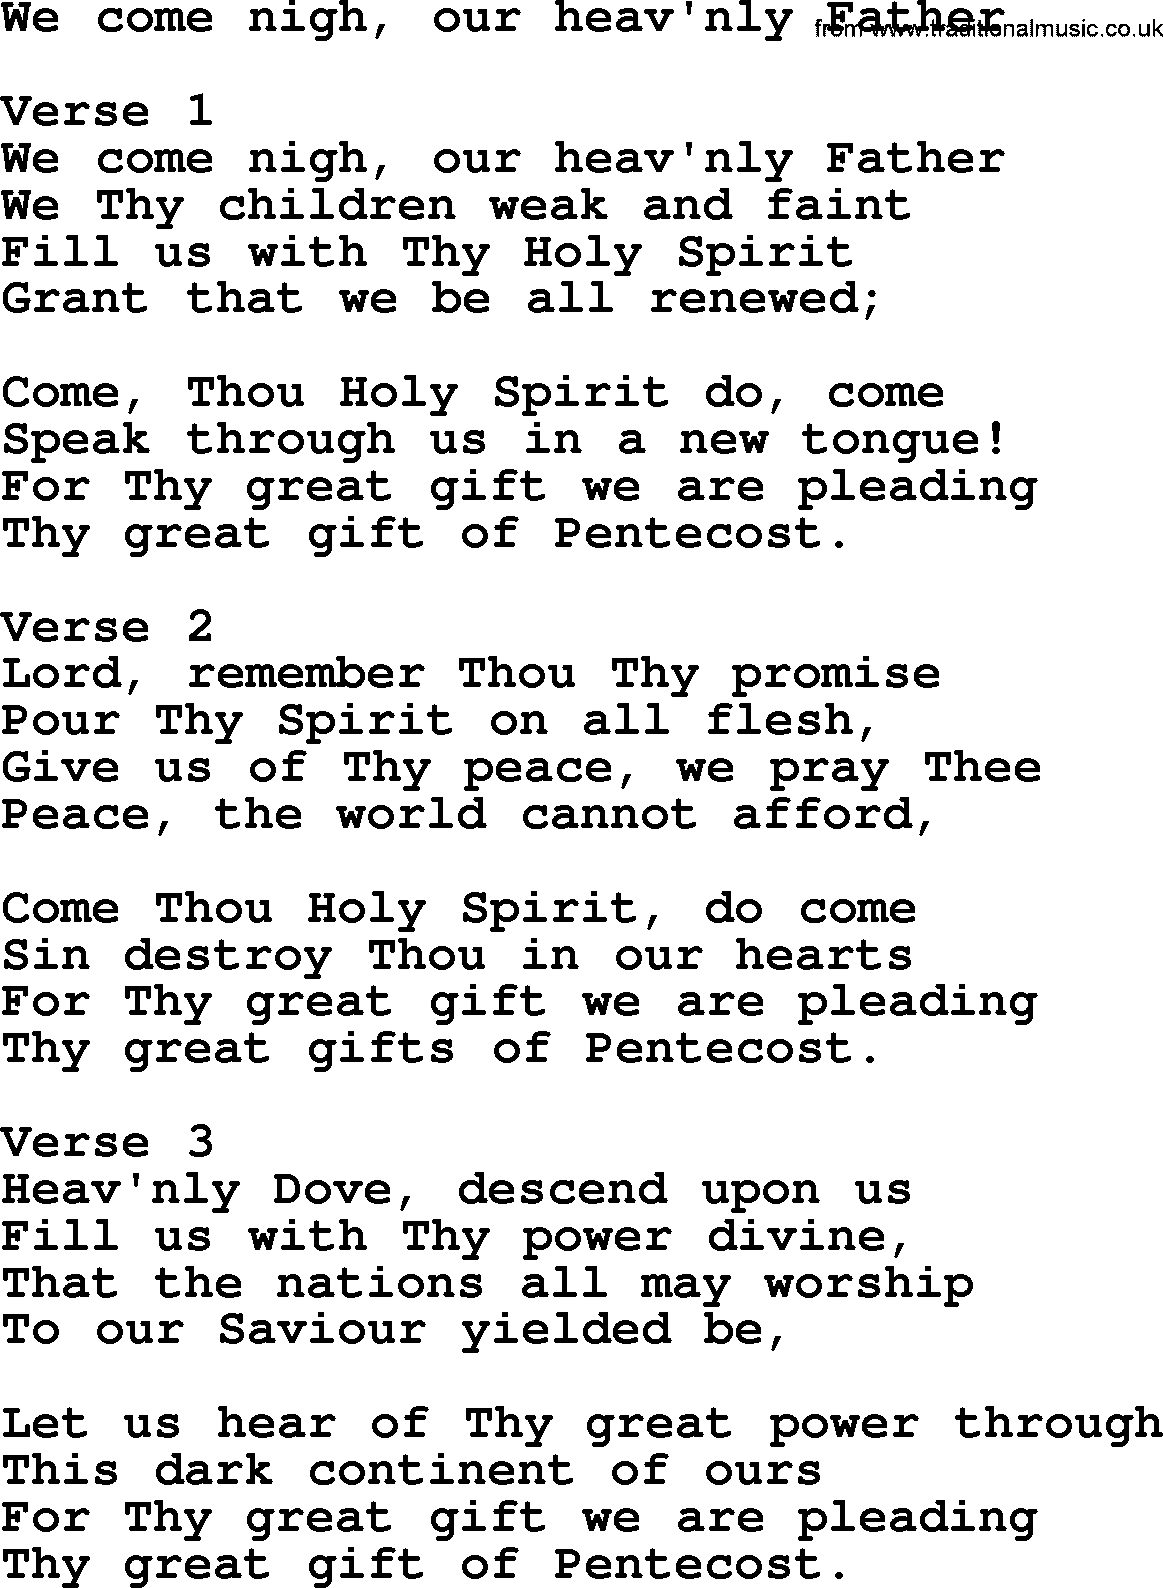 Apostolic and Pentecostal Hymns and Gospel Songs, Hymn: We Come Nigh, Our Heav'nly Father, Christian lyrics and PDF